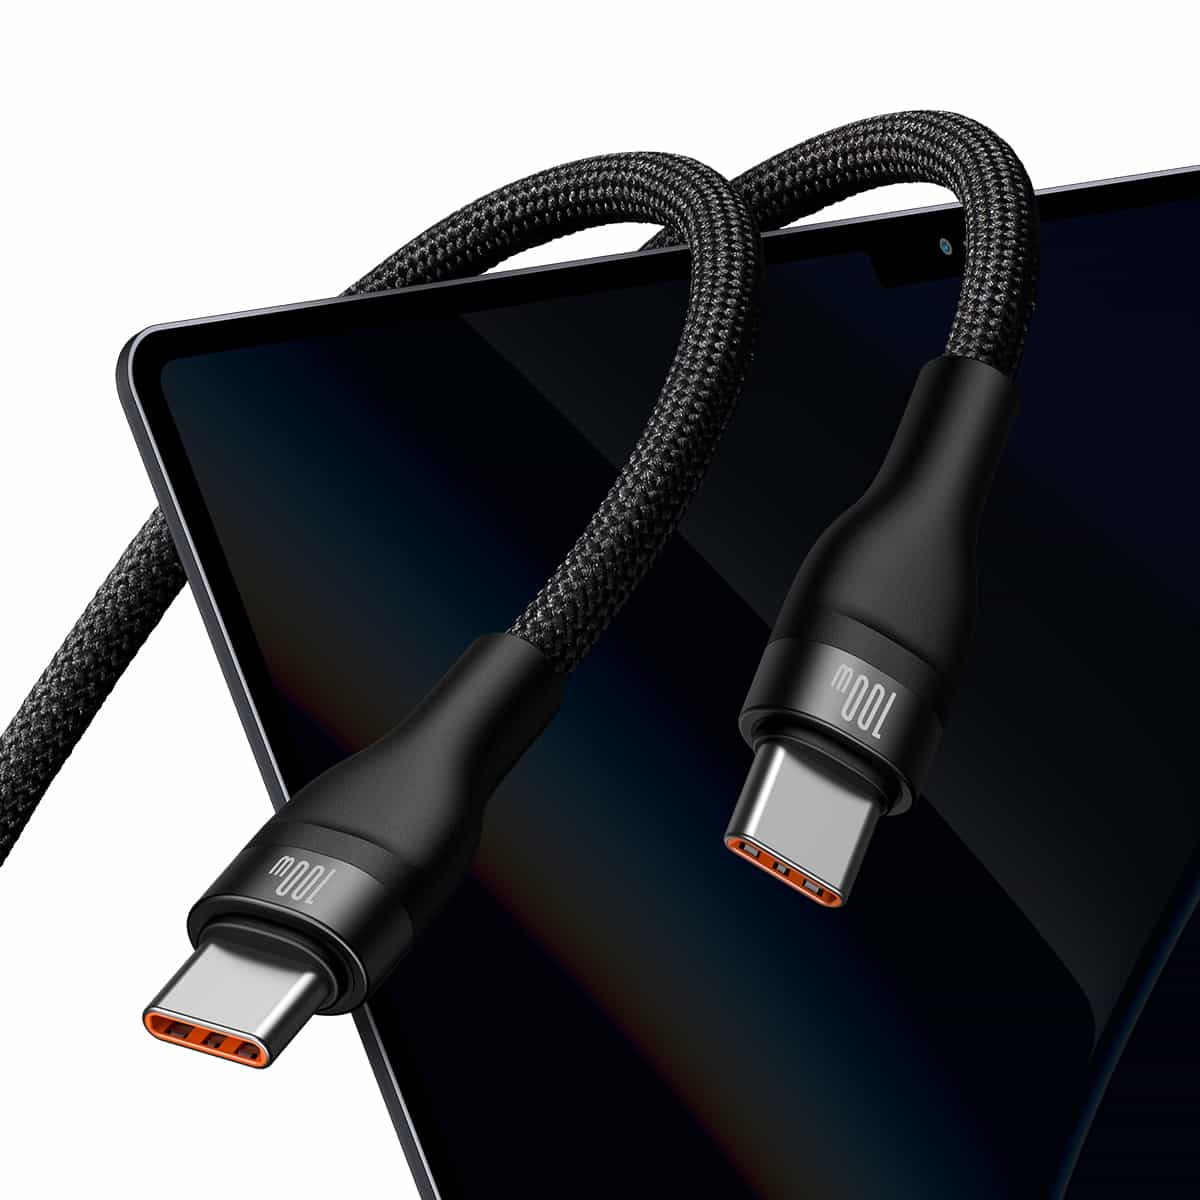 Baseus Flash Series Ⅱ One-for-Two Fast Charging Cable Type-C to C+C 100W 1.5m Black